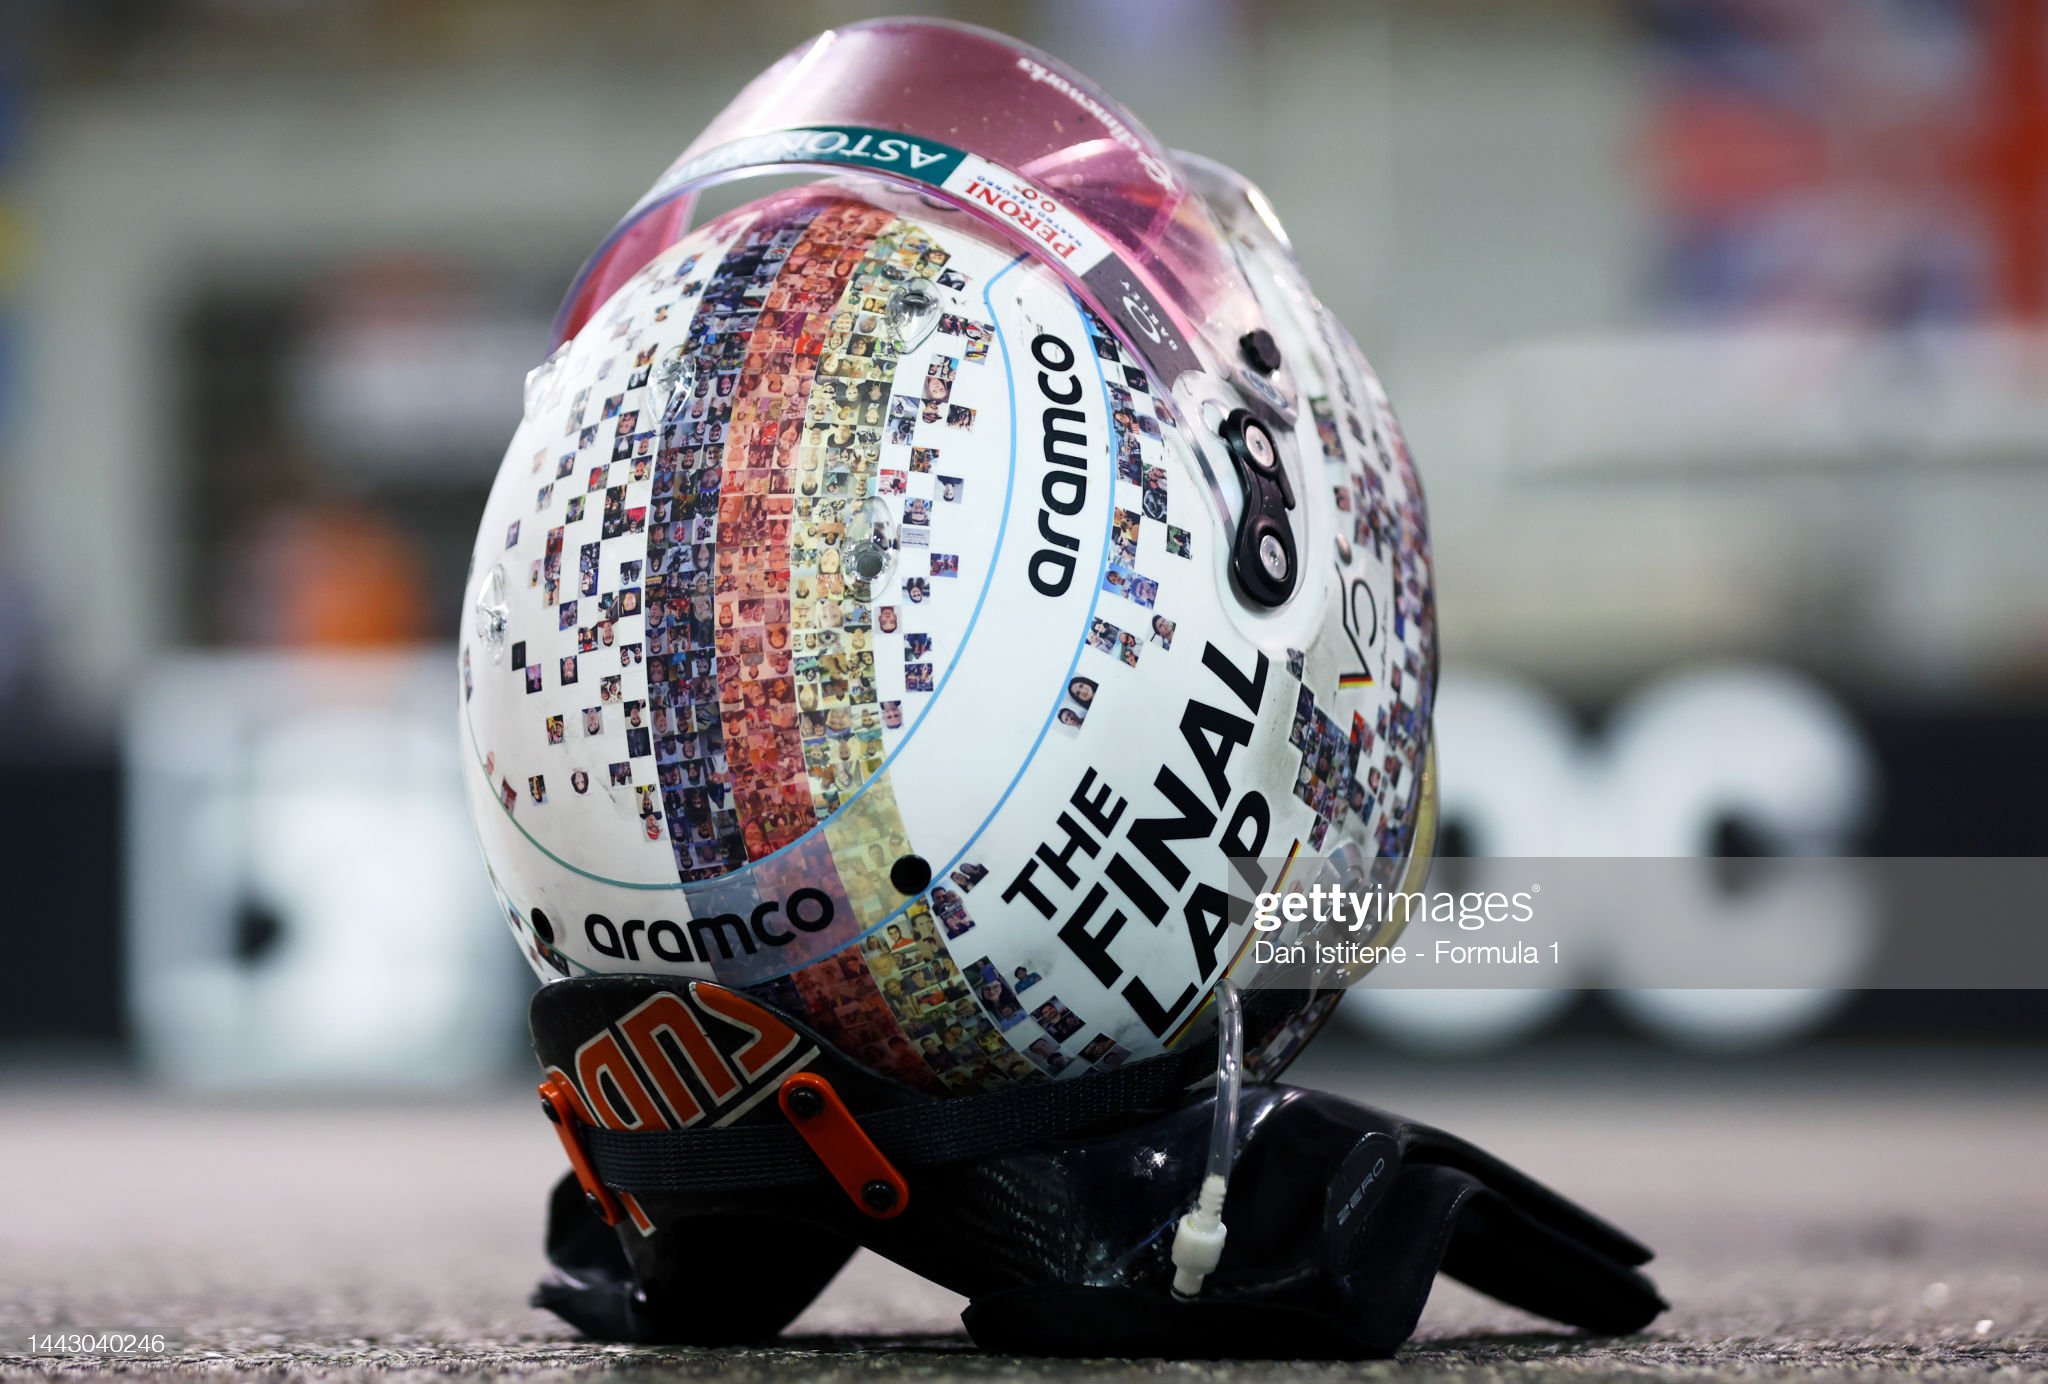 Tenth placed Sebastian Vettel of Germany and Aston Martin F1 Team's race helmet rests on the track following his final race in F1.